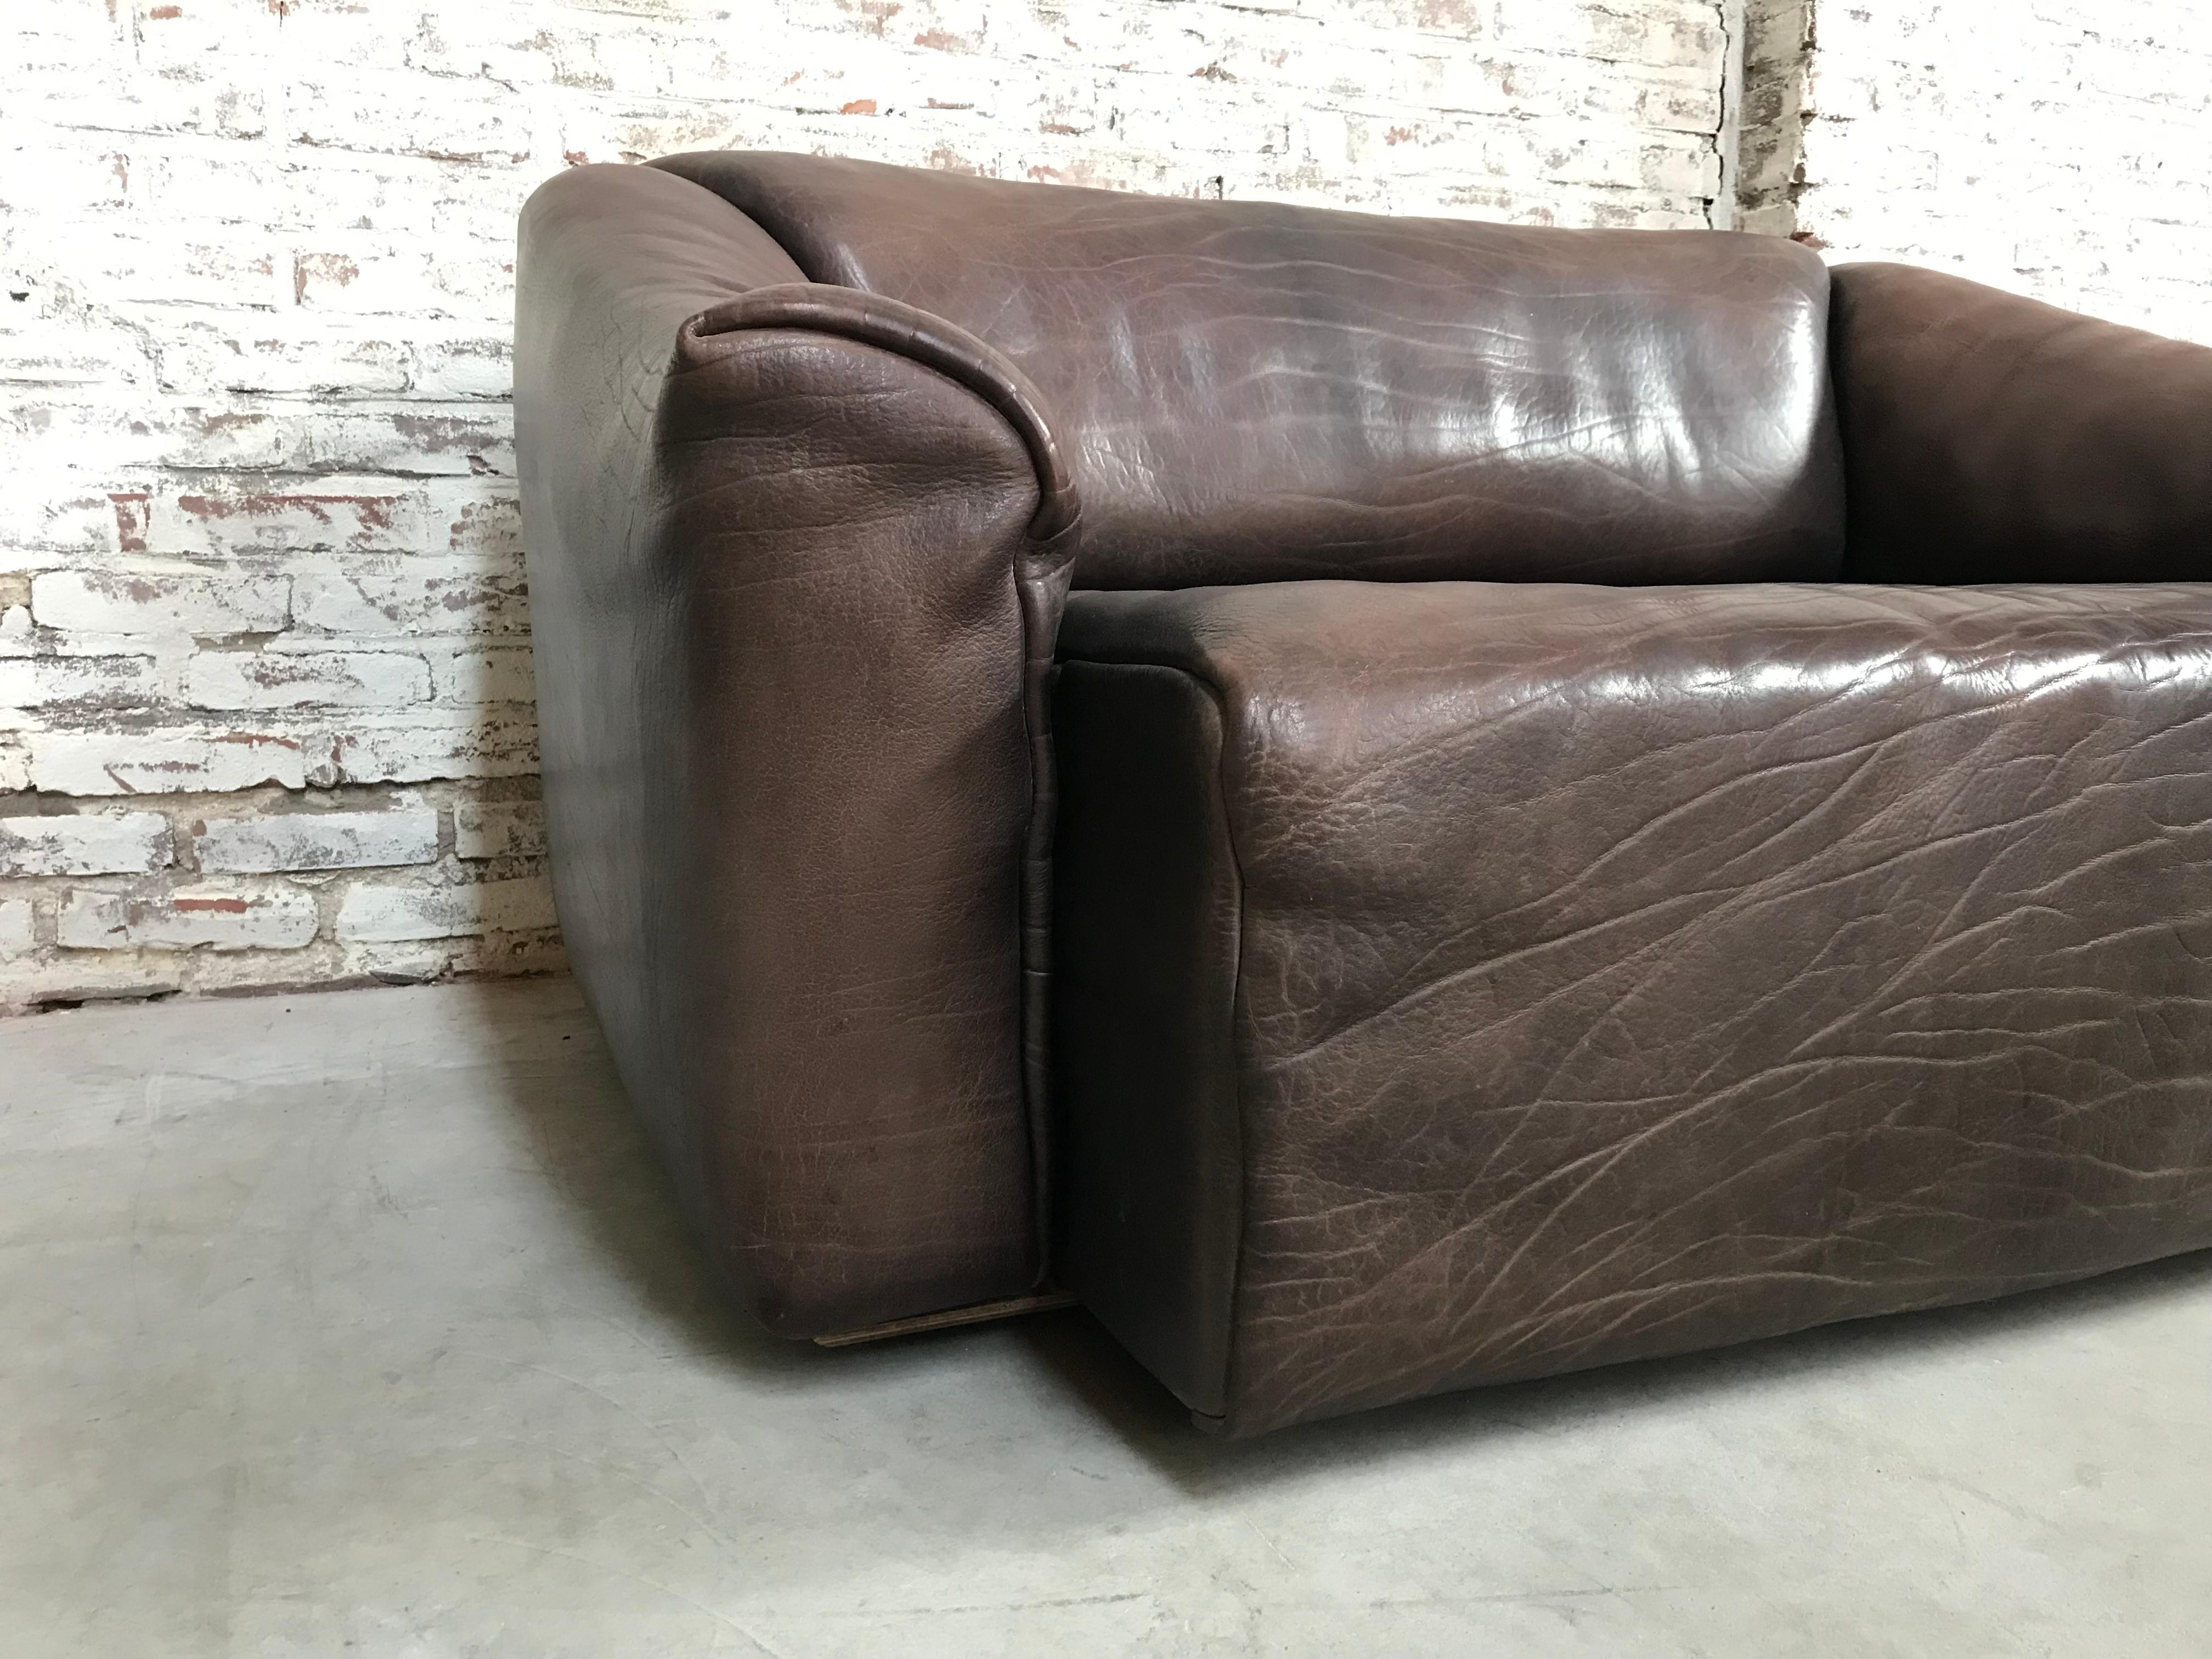 Midcentury Swiss De Sede Ds-47 Two-Seat in Chocolat Neck Leather, 1970s For Sale 5